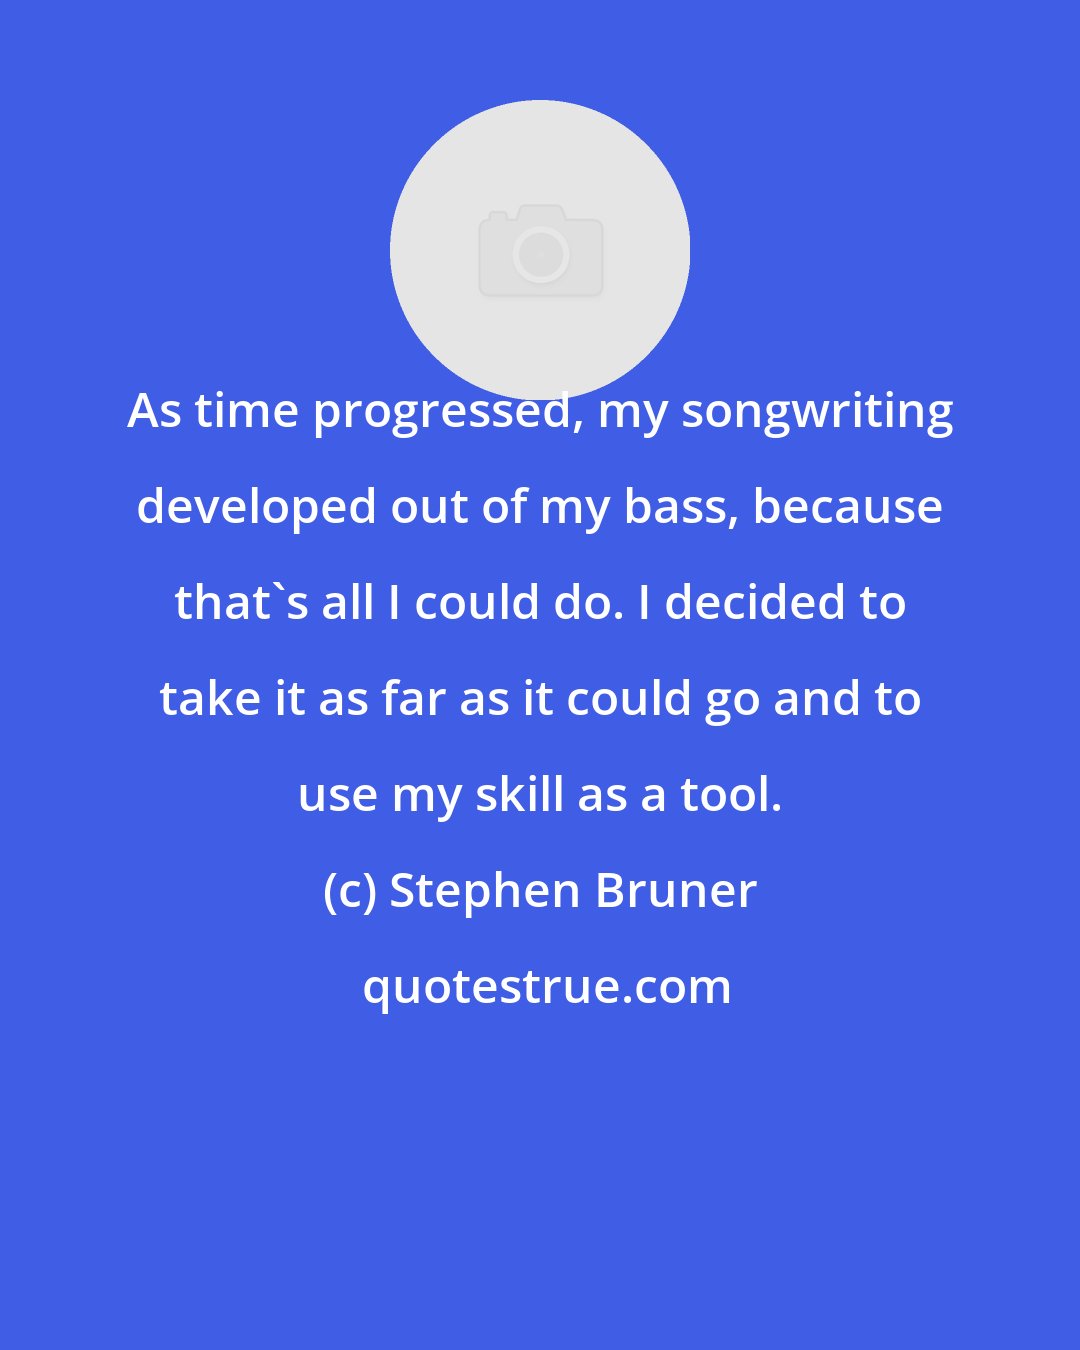 Stephen Bruner: As time progressed, my songwriting developed out of my bass, because that's all I could do. I decided to take it as far as it could go and to use my skill as a tool.